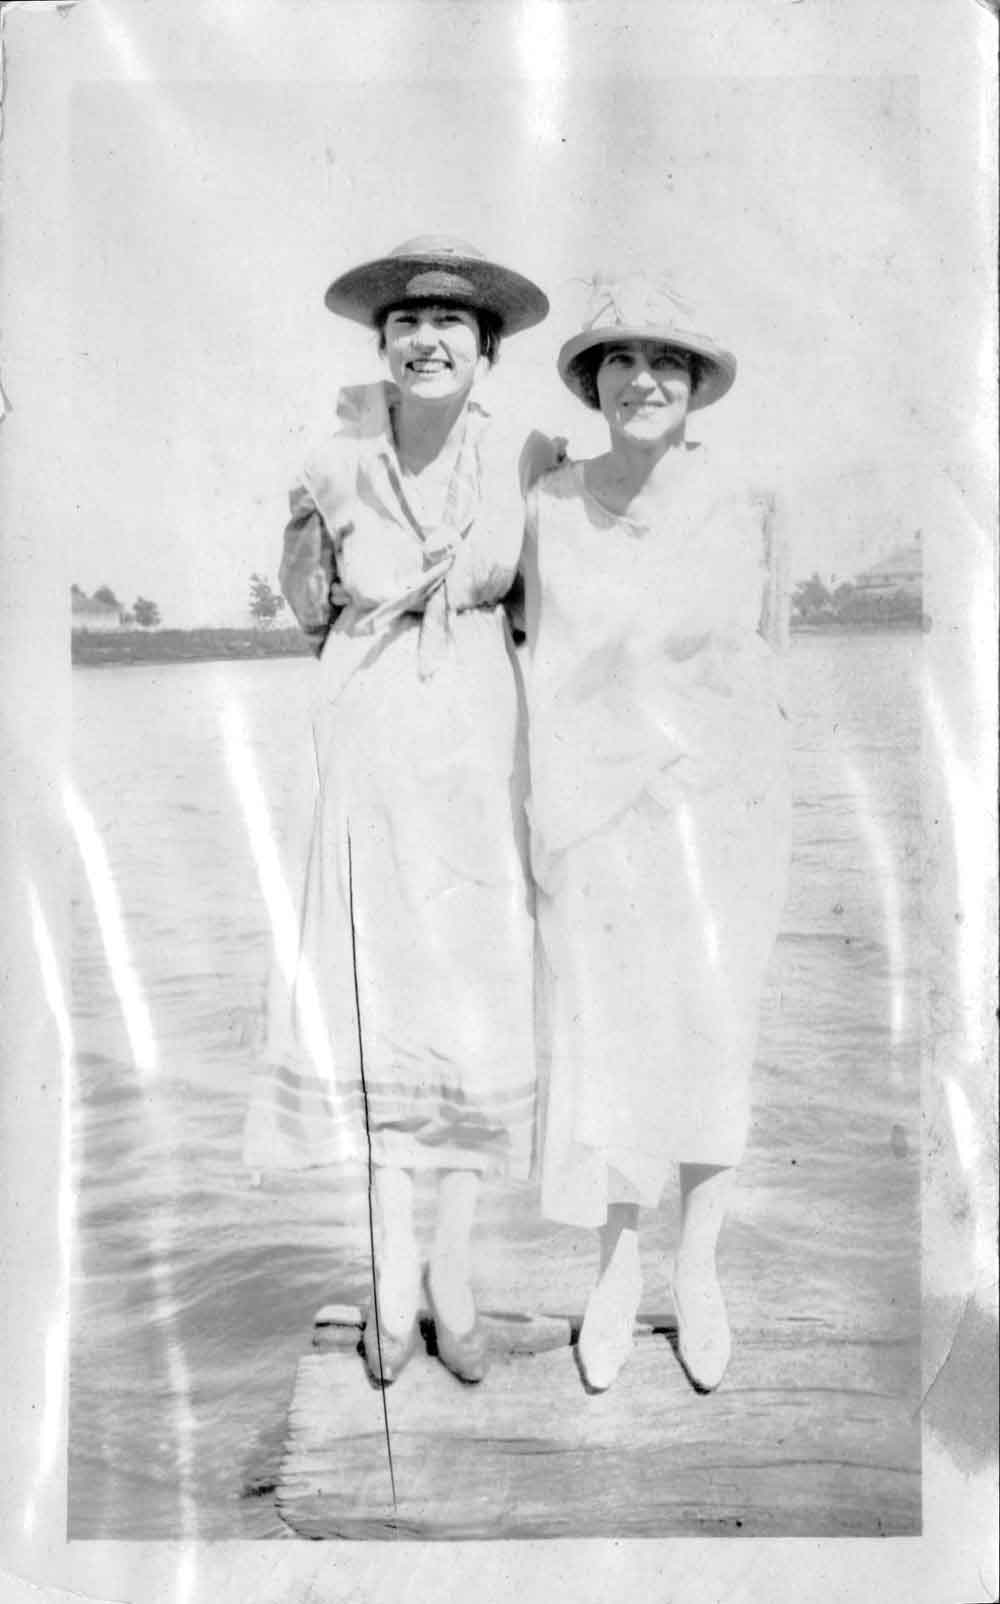 (RAC.2010.02.11) - Women (possibly Madeline Kline at right), c. 1910s